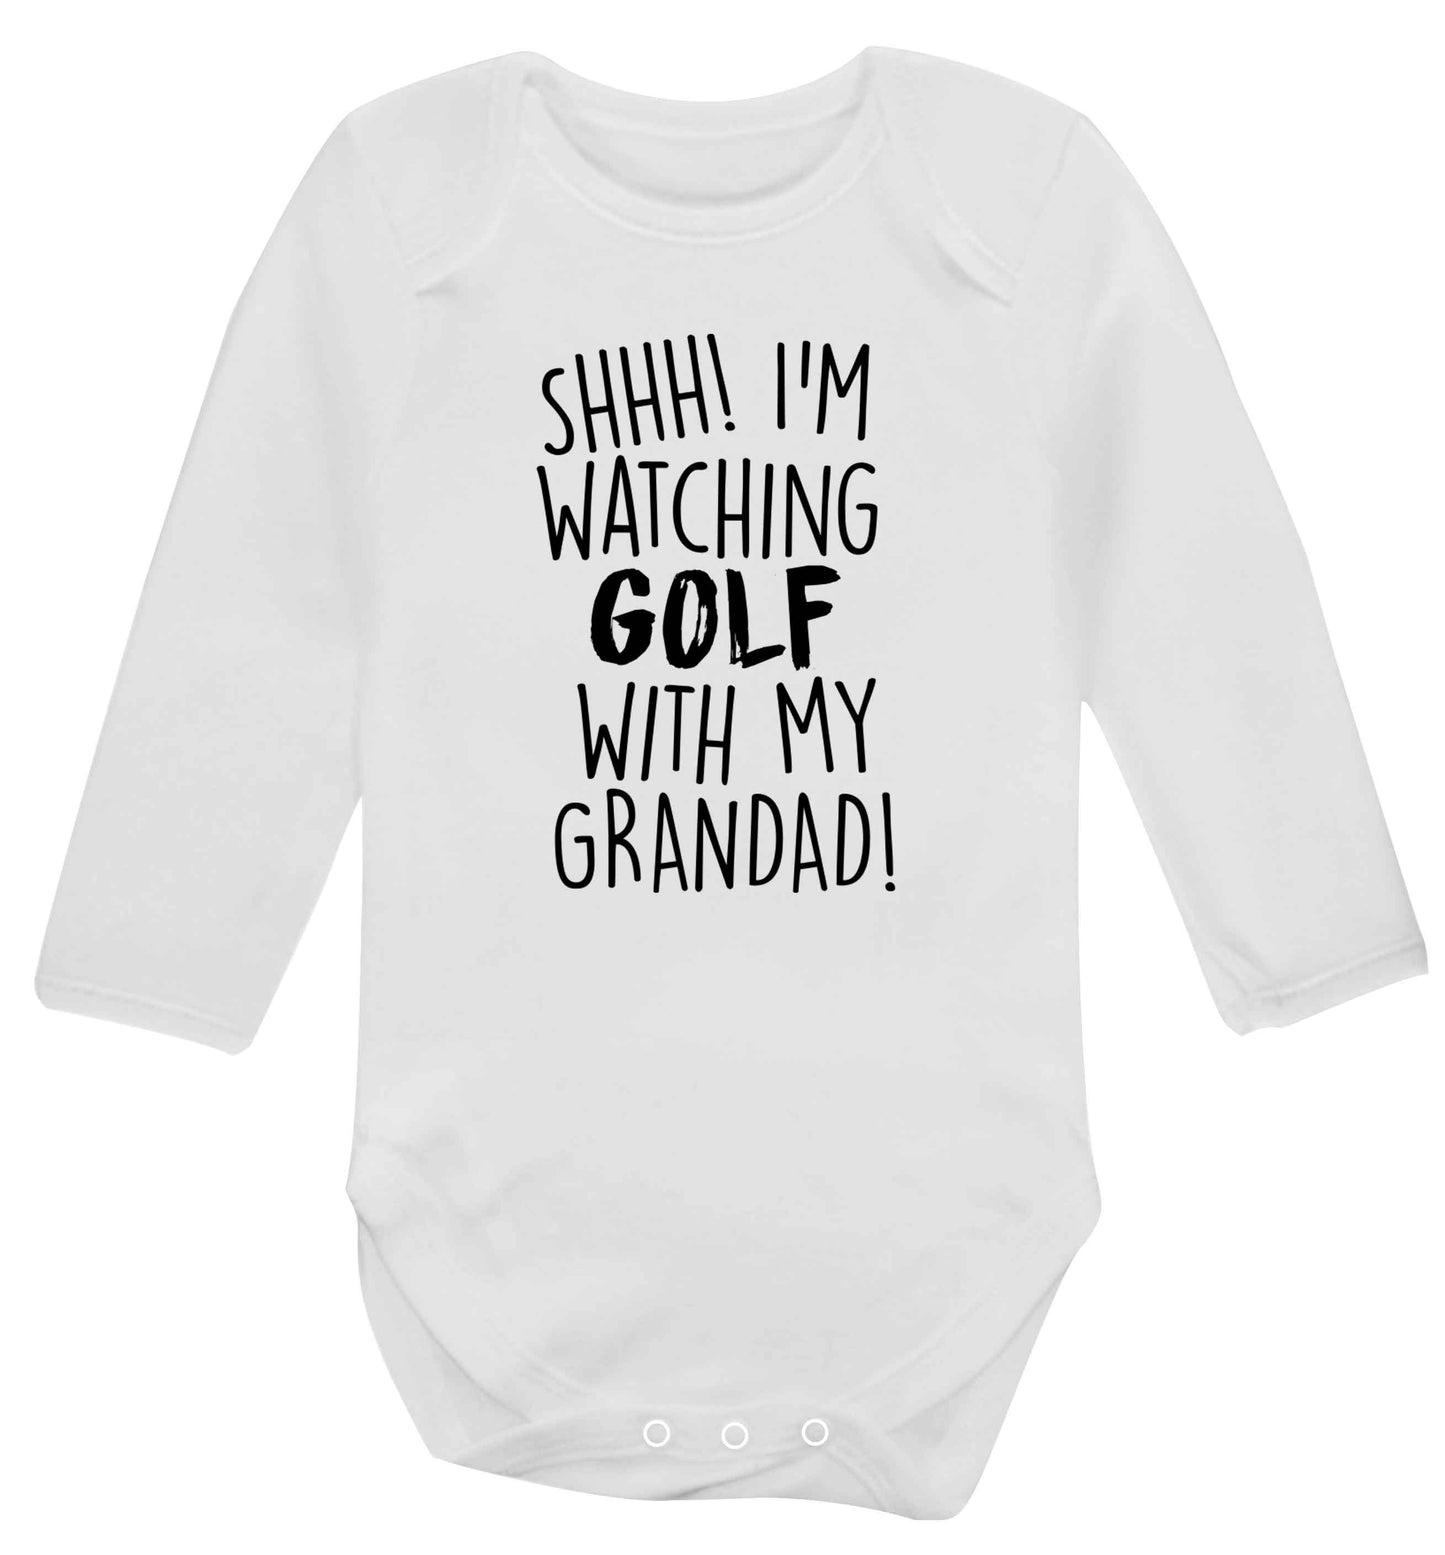 Shh I'm watching golf with my grandad Baby Vest long sleeved white 6-12 months